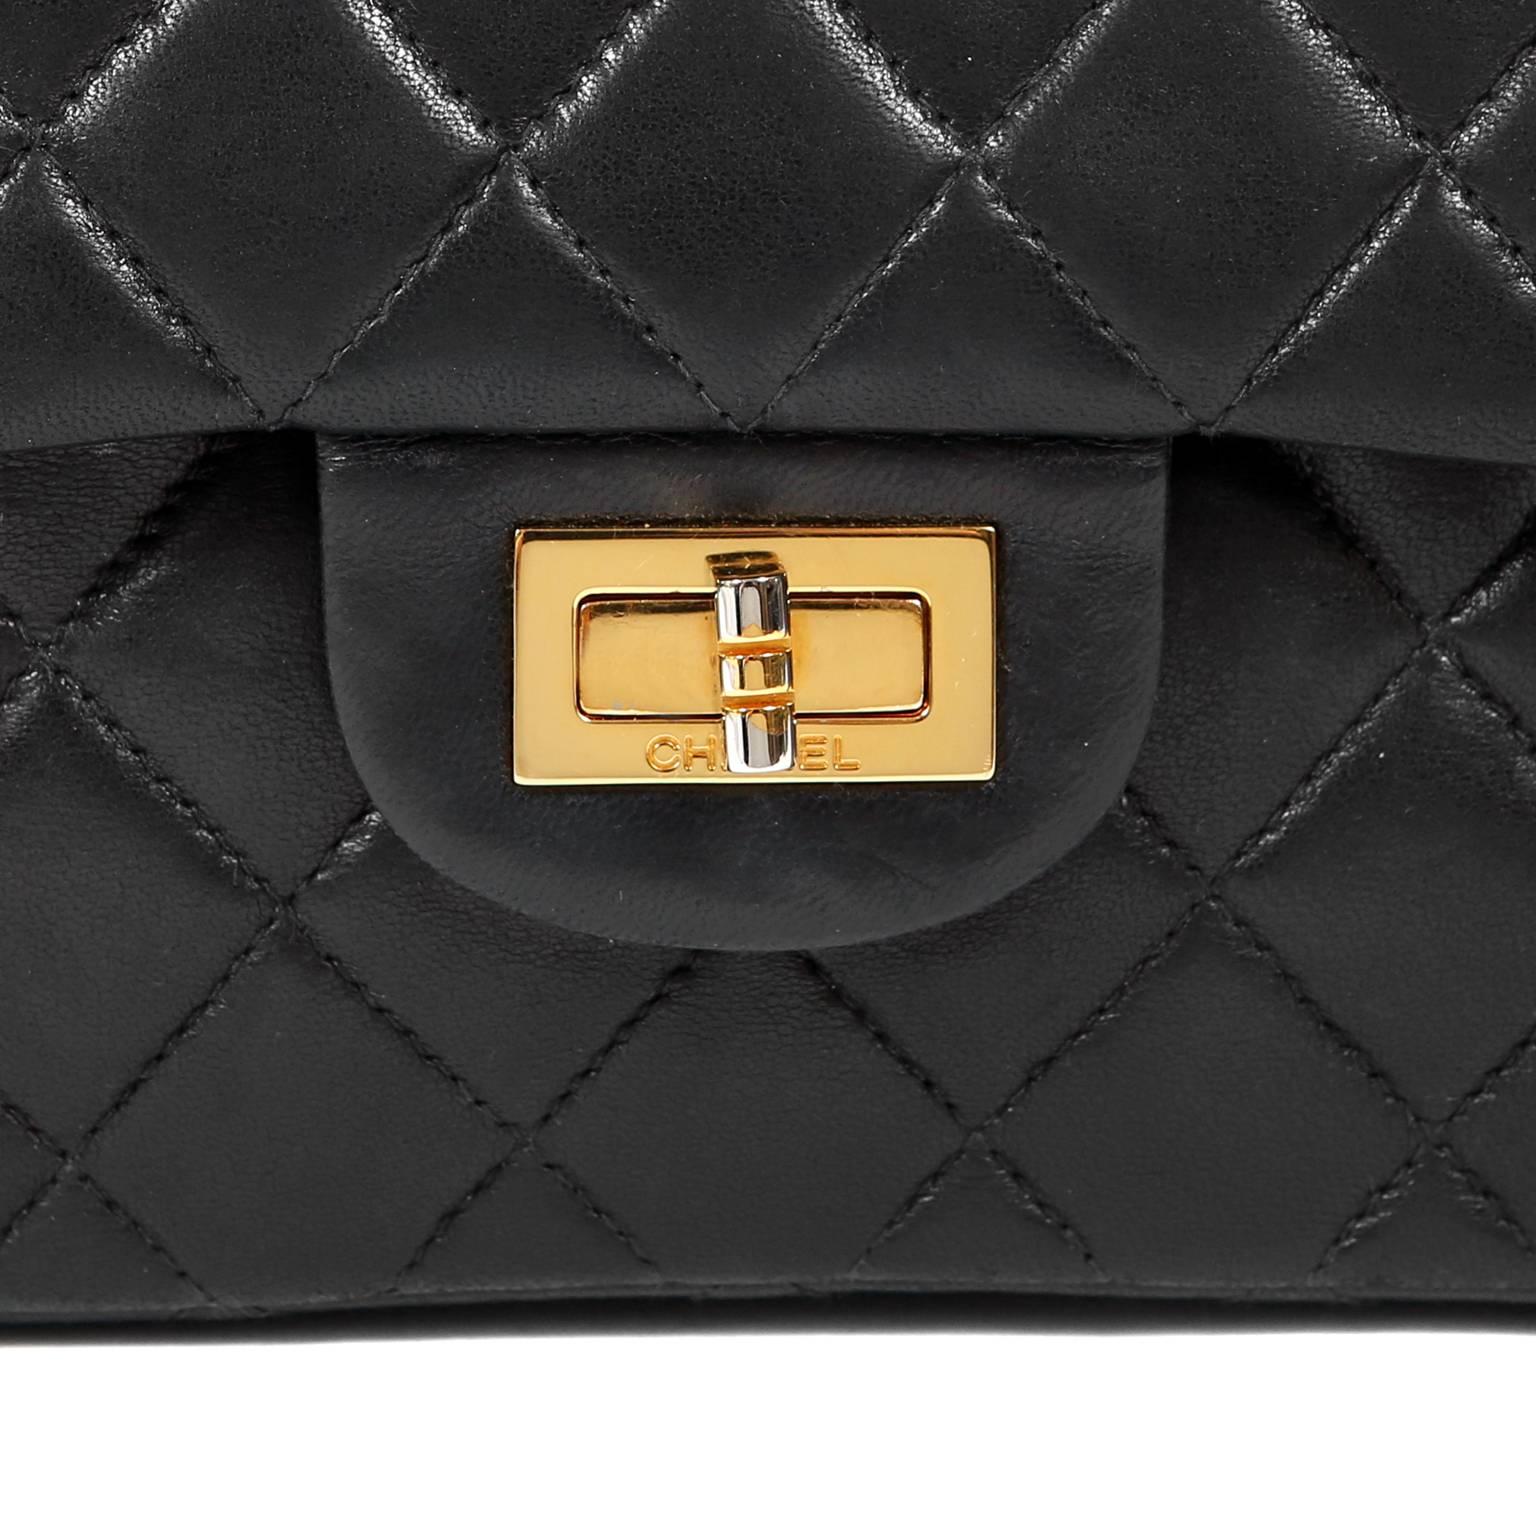 Chanel Black Lambskin 2.55 Reissue Medium Flap Bag with Gold Hardware In Excellent Condition For Sale In Malibu, CA